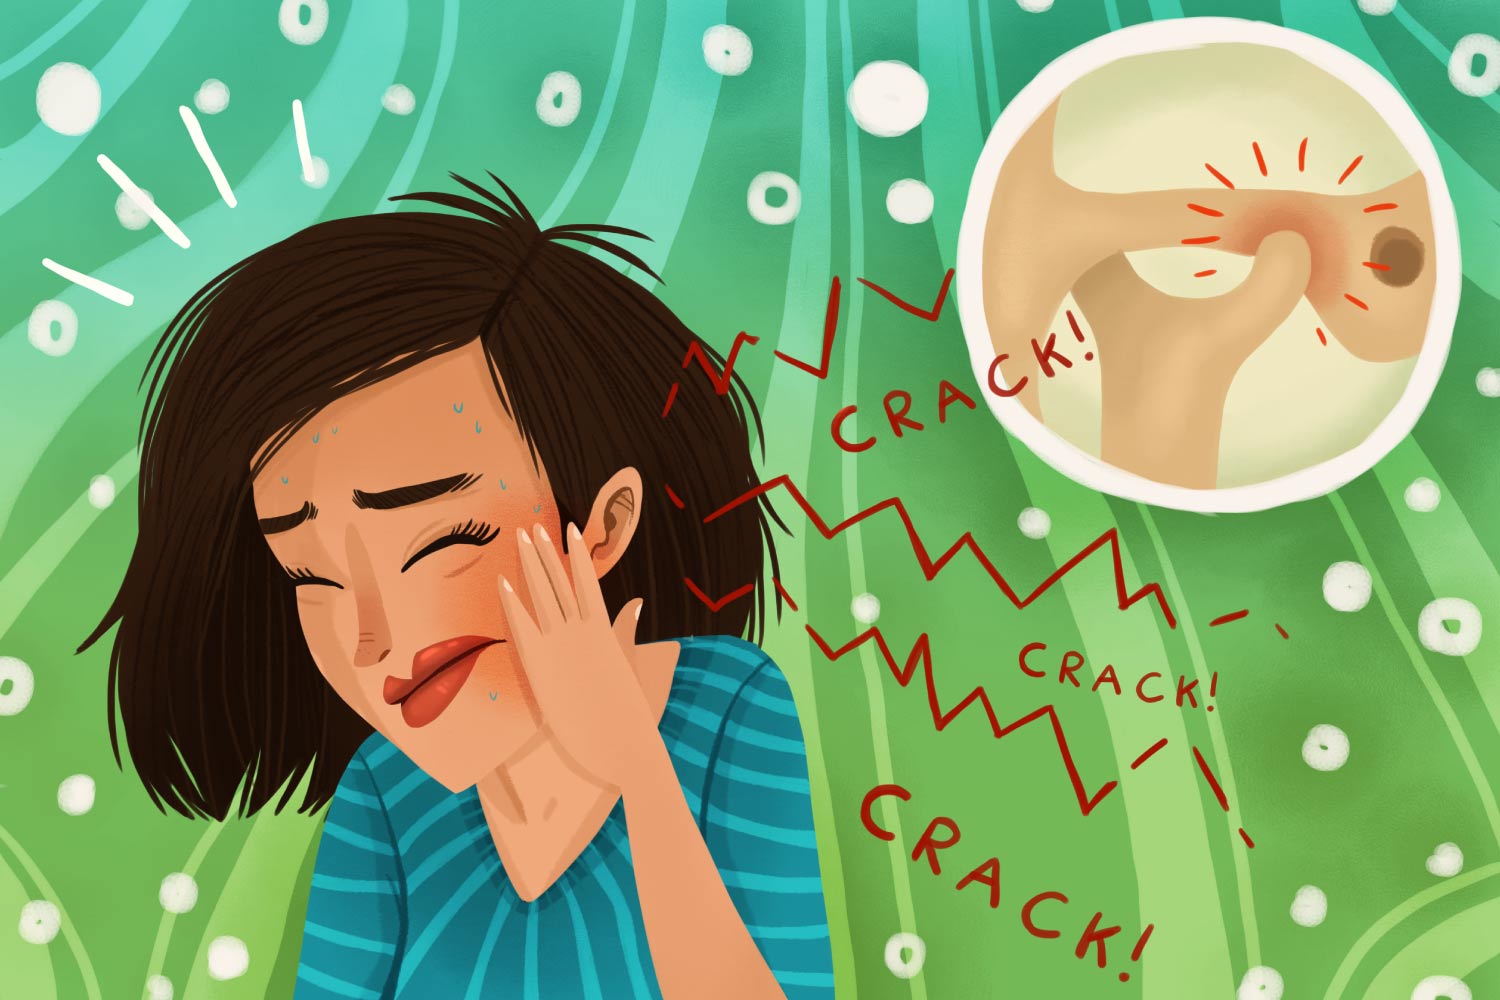 Cartoon image of a woman cringing in pain due to TMJ dysfunction